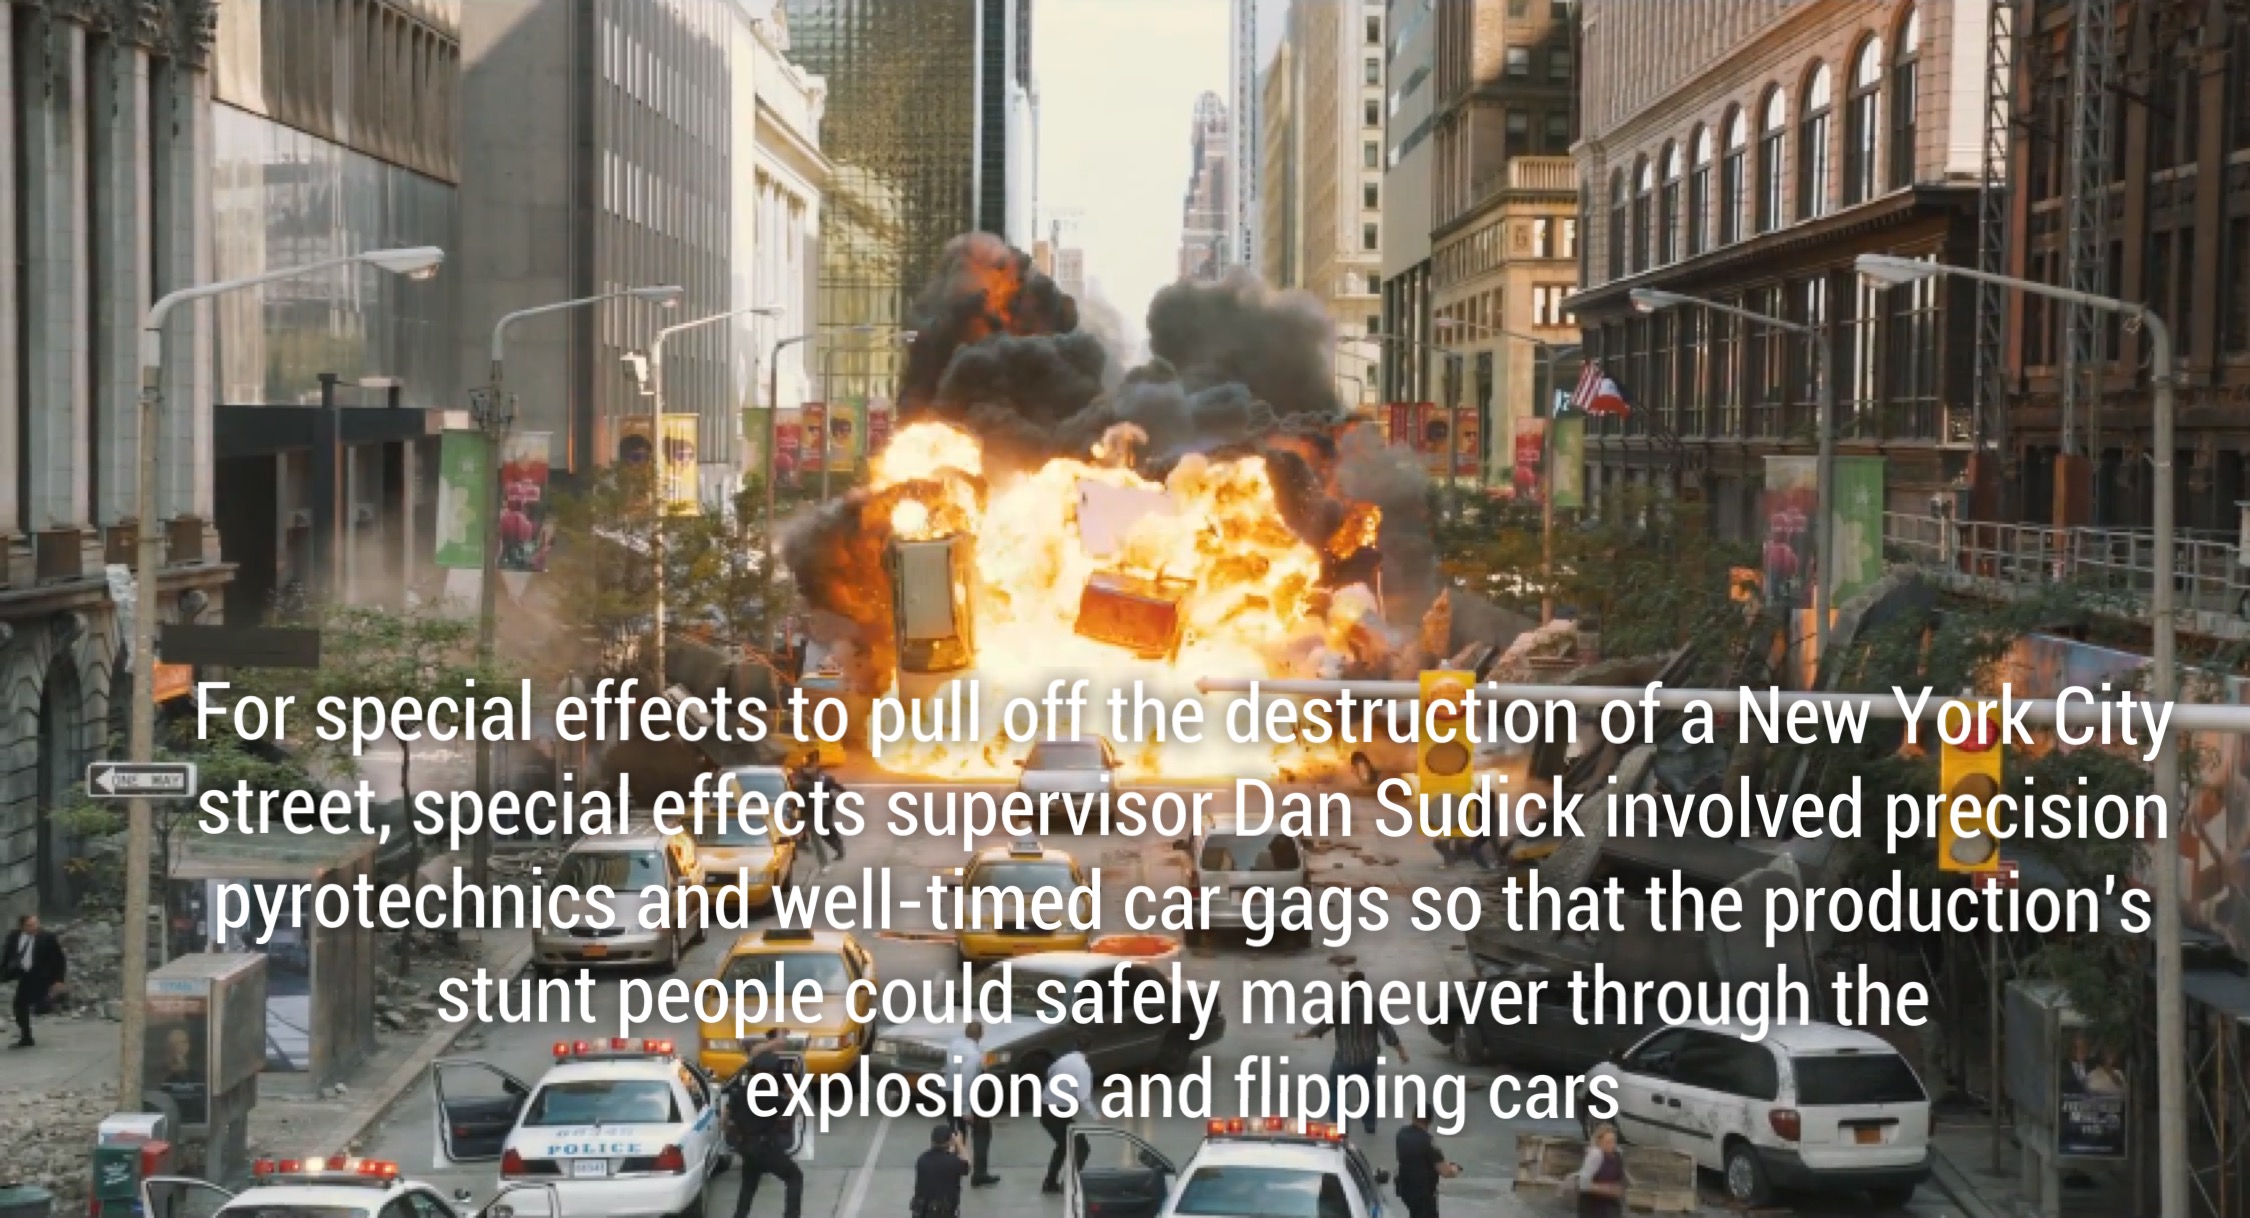 battle of new york avengers - Ent For special effects to pull off the destruction of a New York City street, special effects supervisor Dan Sudick involved precision pyrotechnics and welltimed car gags so that the production's stunt people could safely ma